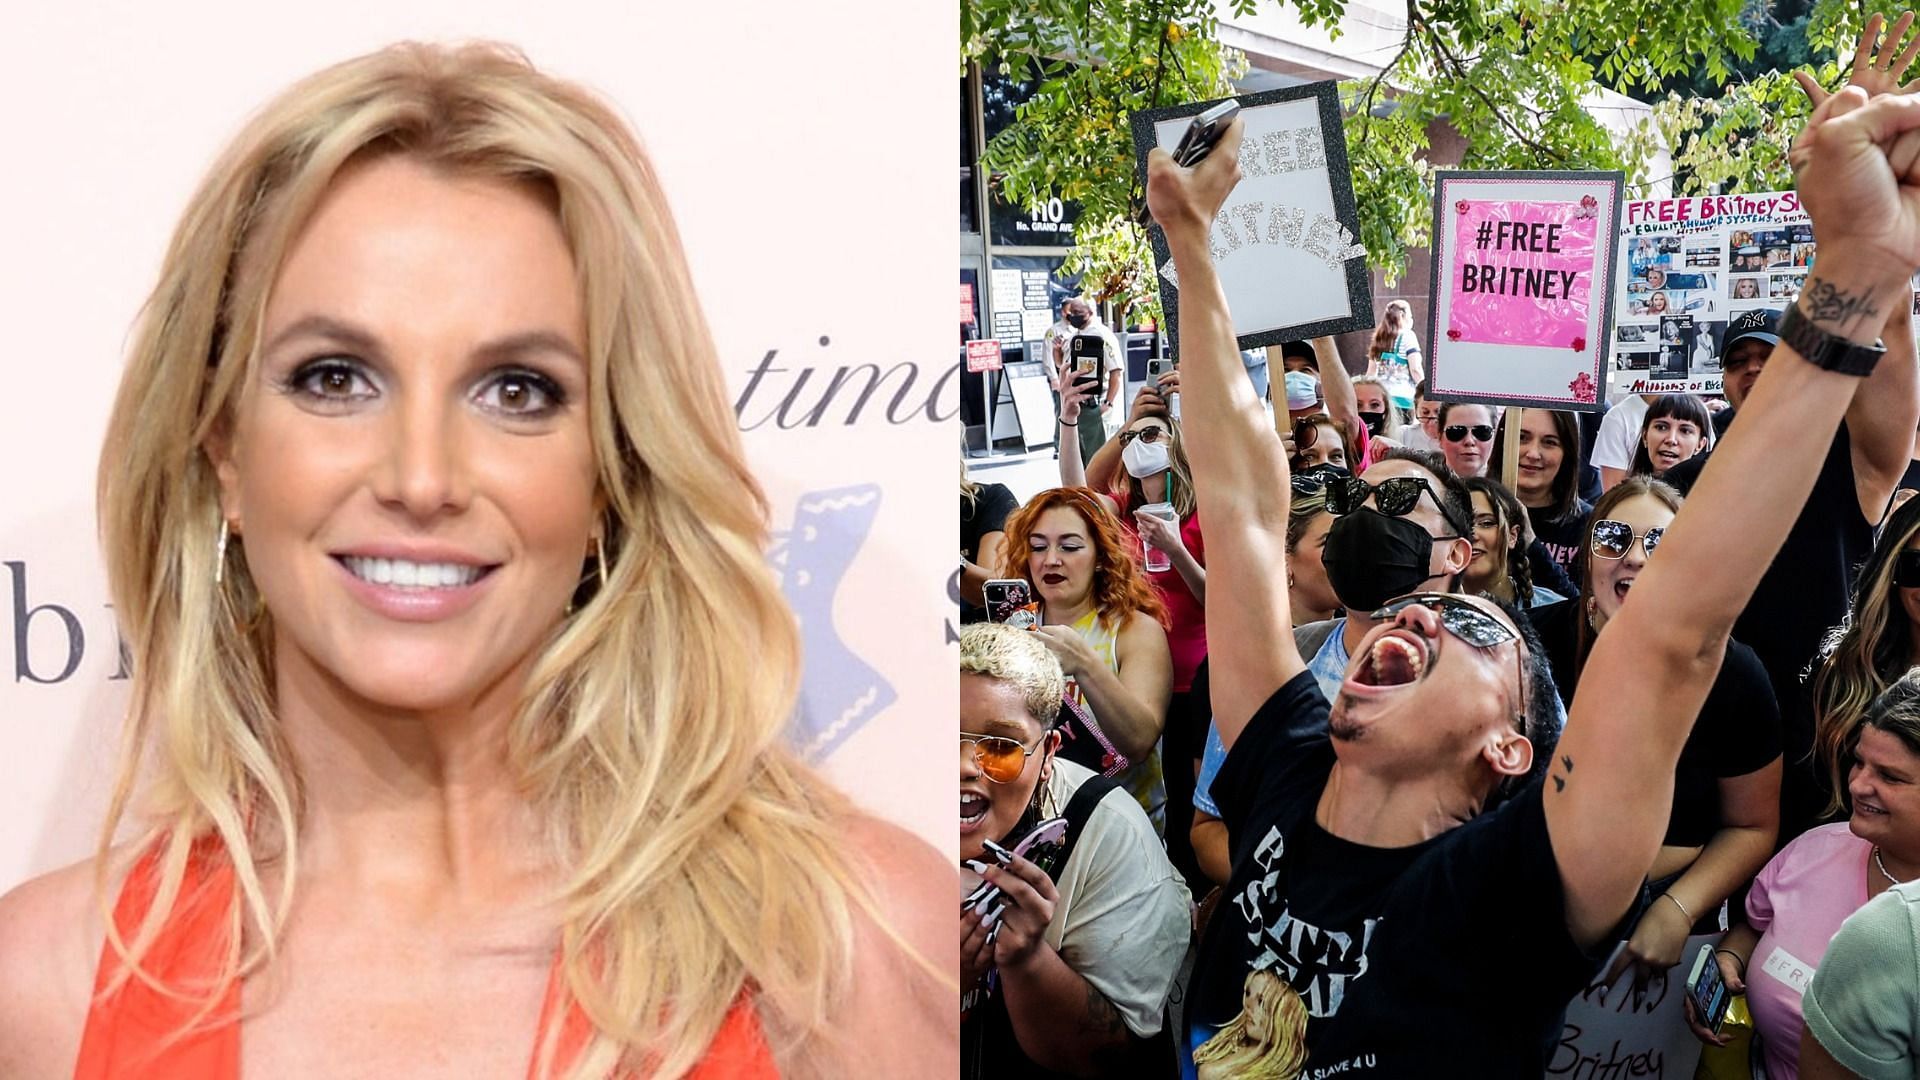 As per reports, Britney Spears can now use her own signature on documents (Image via Sportskeeda)